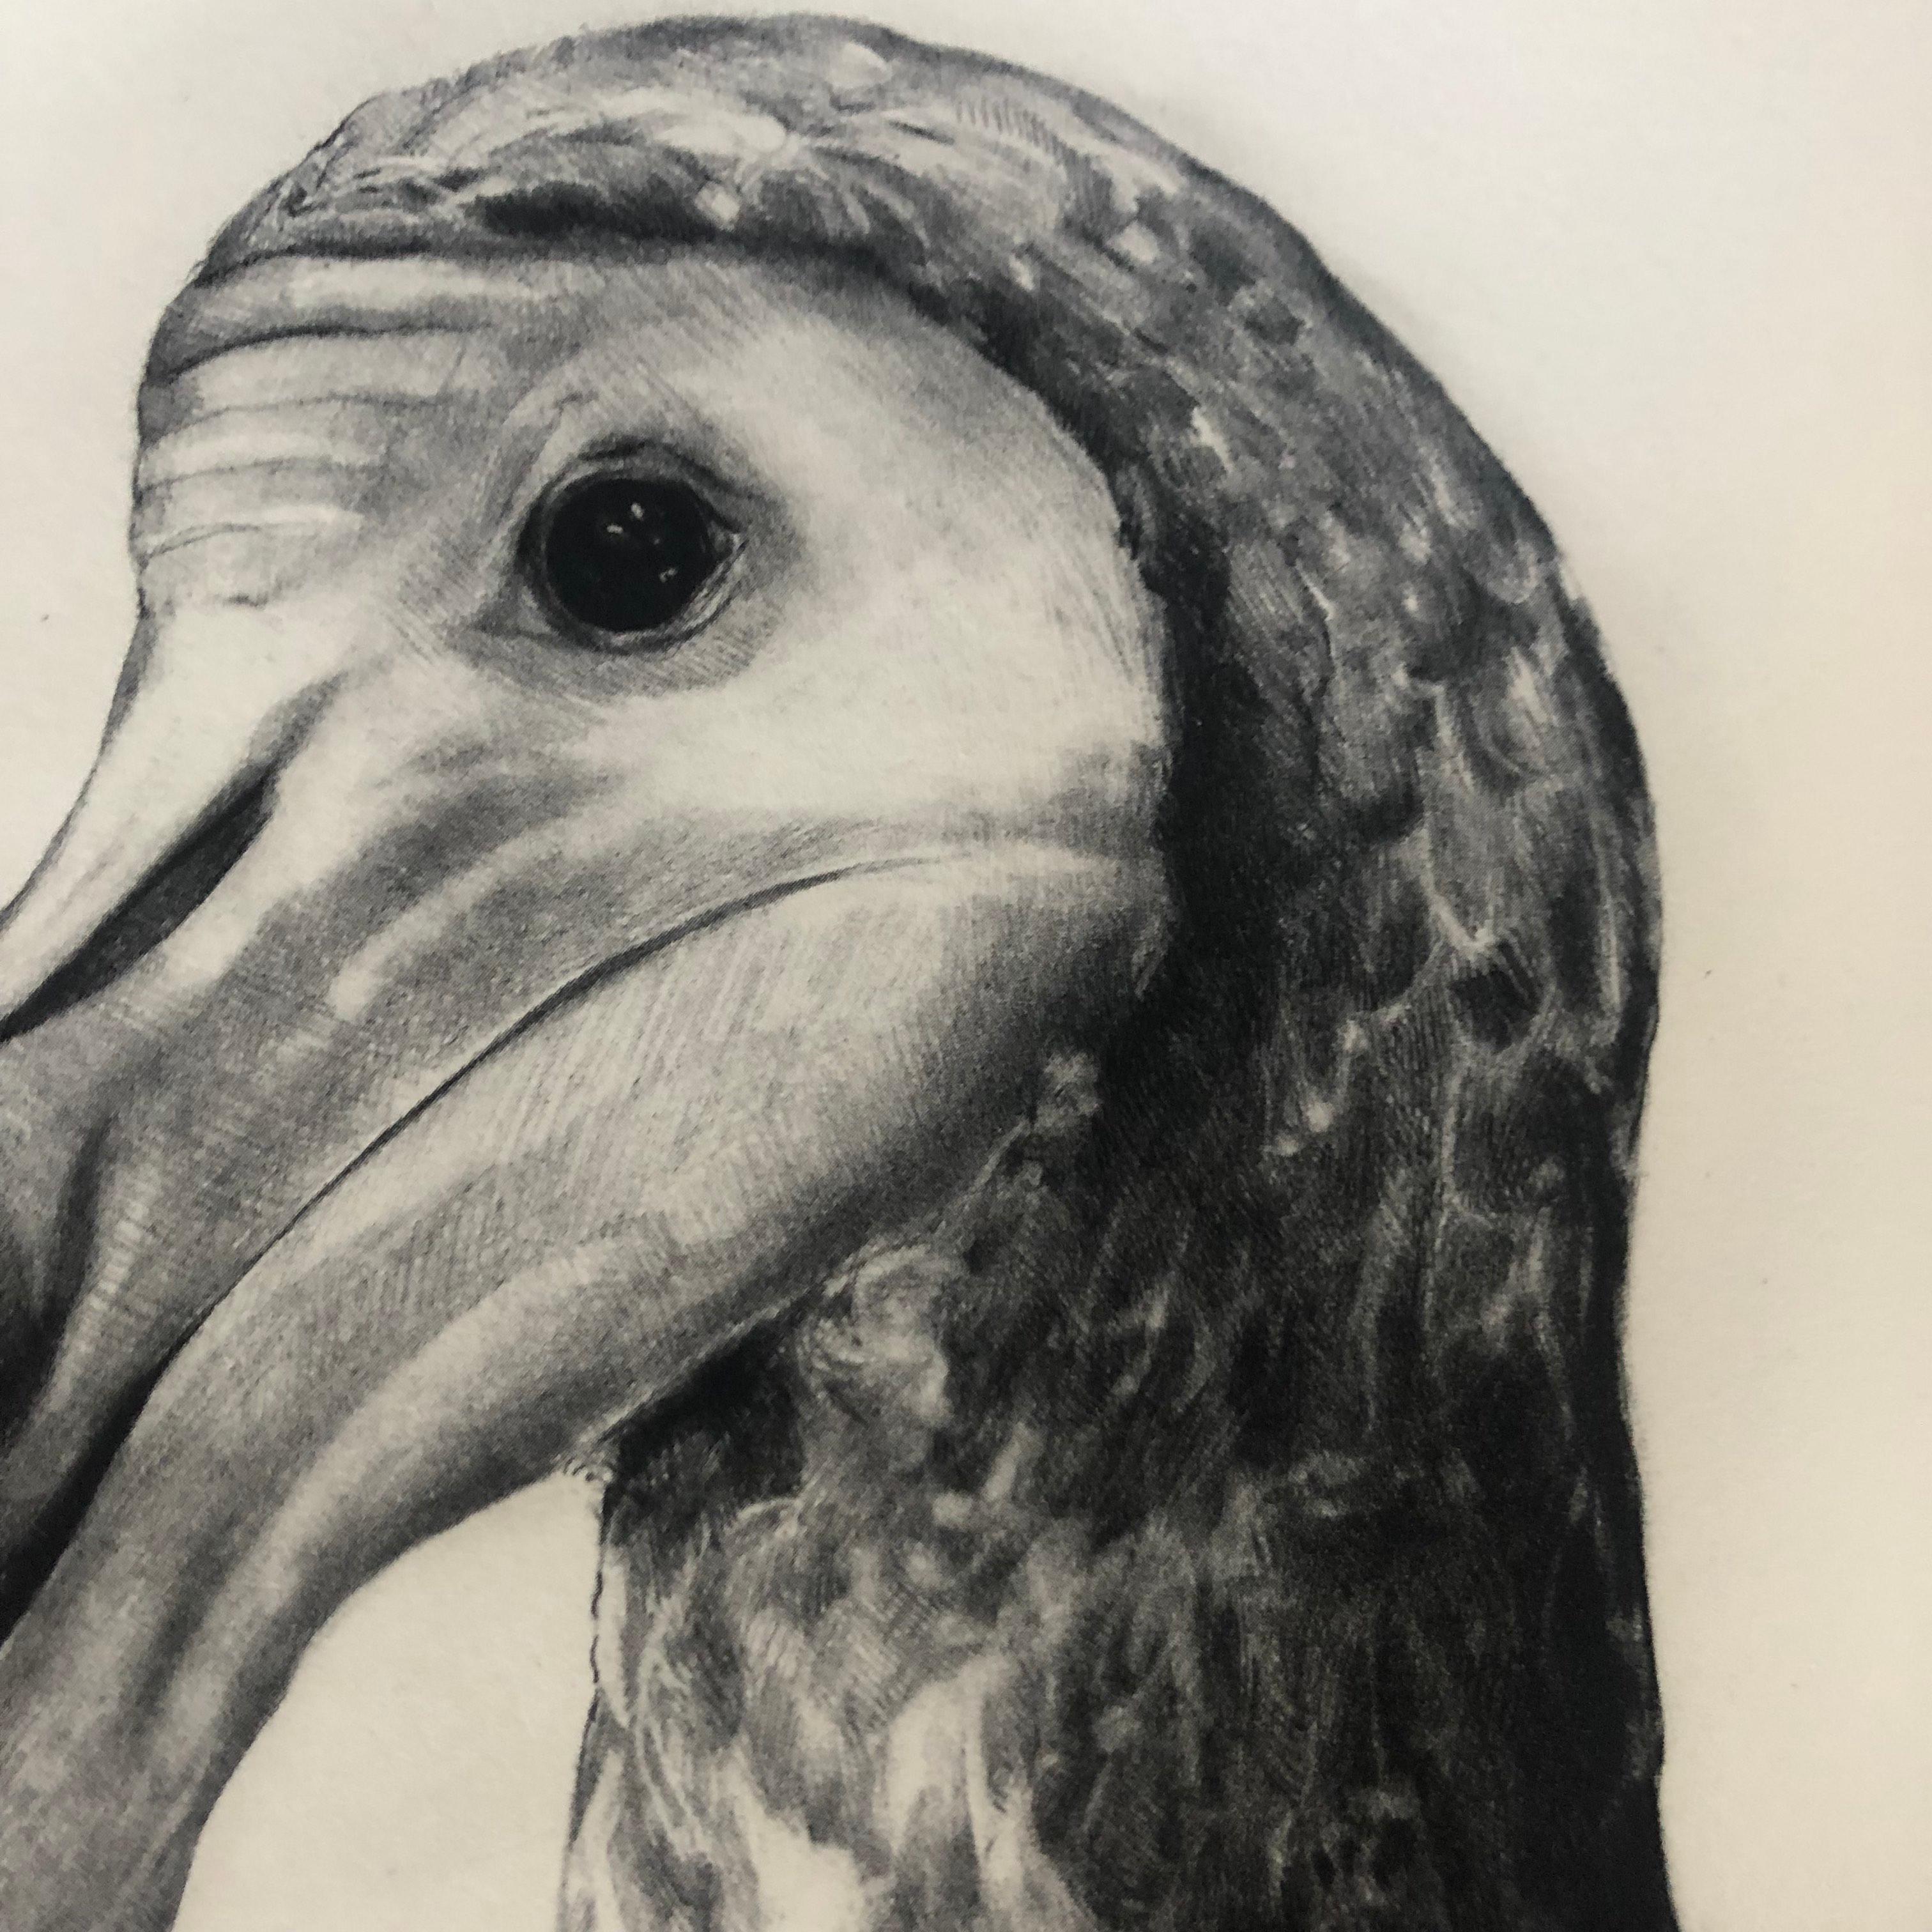 Tammy Mackay
Rowland’s Dodo (Version II)
Limited Edition Photppolymer Print
Edition of 30
Size: H 56.5cm x W 75cm x D 0.1cm
Sold Unframed
(Please note that in situ images are purely an indication of how a piece may look.)

Rowland’s Dodo (Version